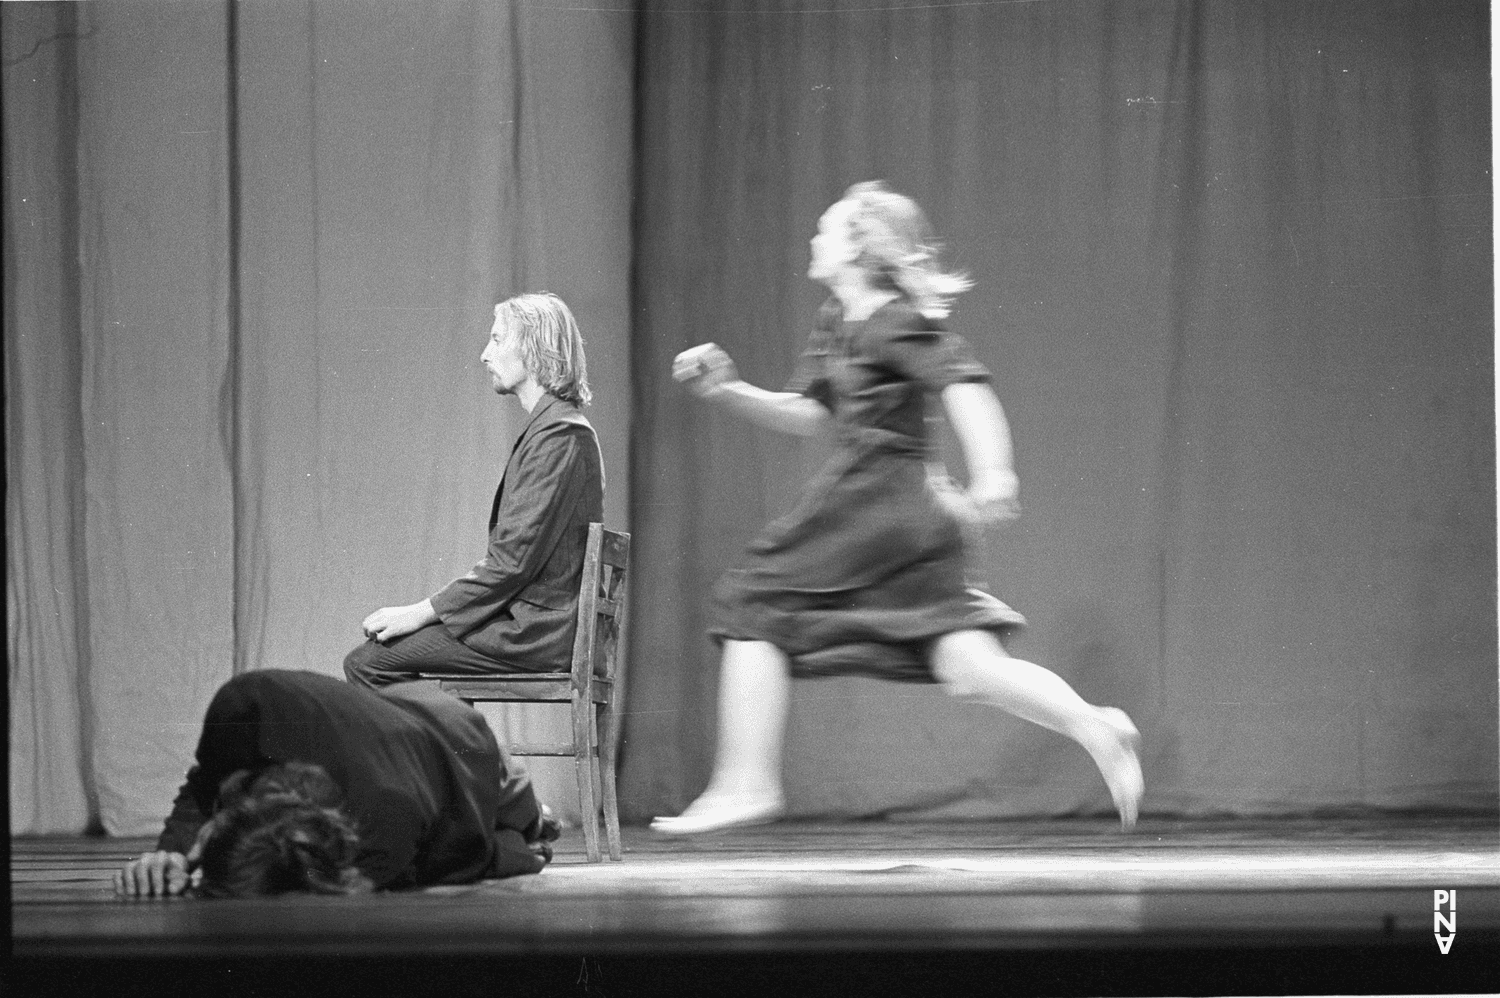 Marlis Alt and Dominique Mercy in “Adagio – Five Songs by Gustav Mahler” by Pina Bausch